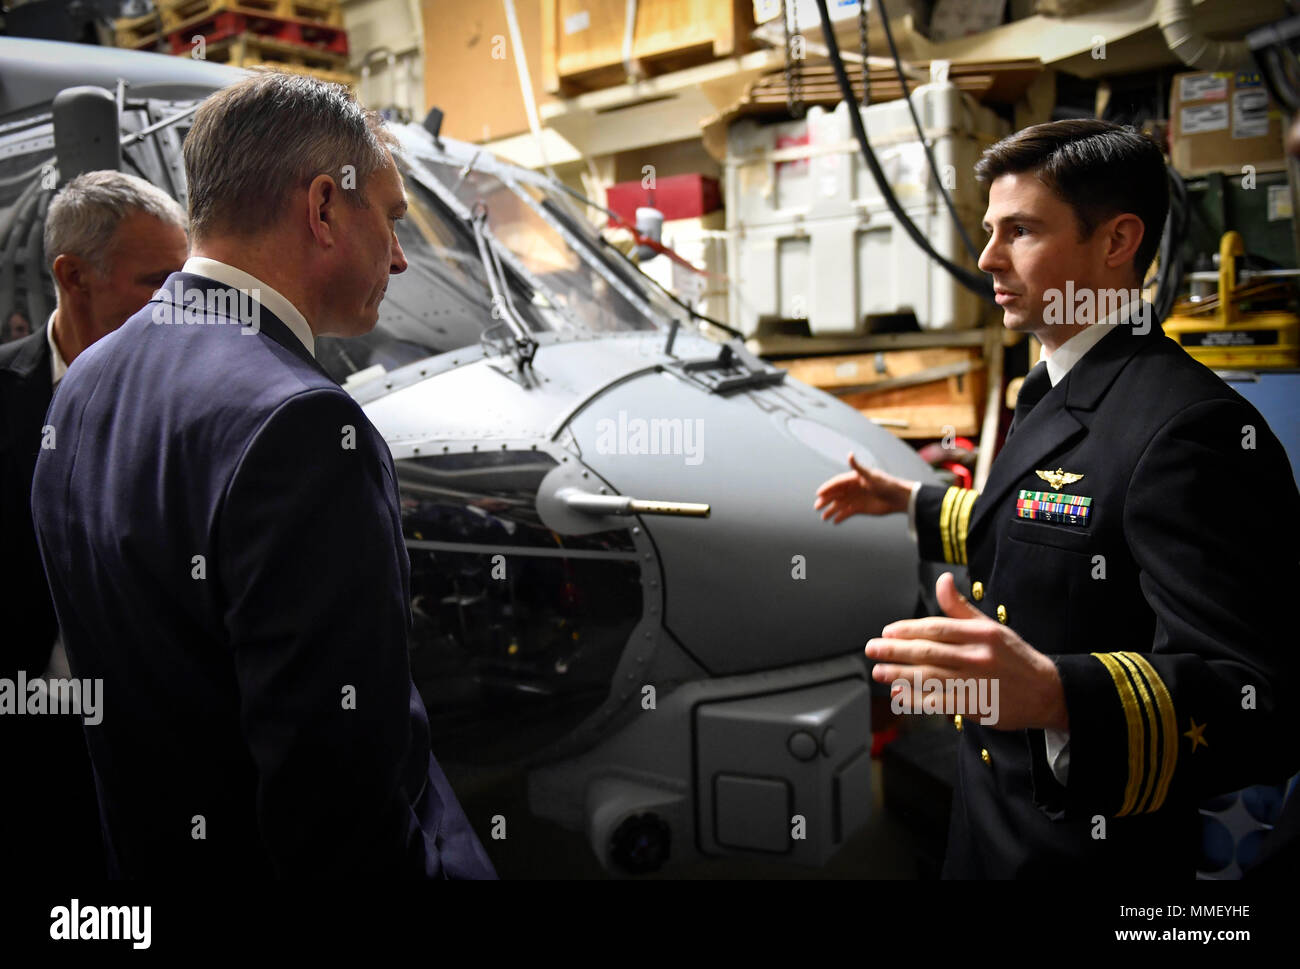 171030-N-UY653-046 OSLO, Norway (Oct. 30, 2017) Lt. Cmdr. Michael Sullivan, right, assigned to the 'Grandmasters' of Helicopter Maritime Strike Squadron (HSM) 46, gives a tour of an MH-60R Sea Hawk helicopter to Norwegian Defense Minister Frank Bakke-Jensen aboard the Arleigh Burke-class guided-missile destroyer USS Oscar Austin (DDG 79). Oscar Austin is on a deployment supporting U.S. national security interests in Europe, and increasing theater security cooperation and forward naval presence in the U.S. 6th Fleet area of operations. (U.S. Navy photo by Mass Communication Specialist 2nd Class Stock Photo